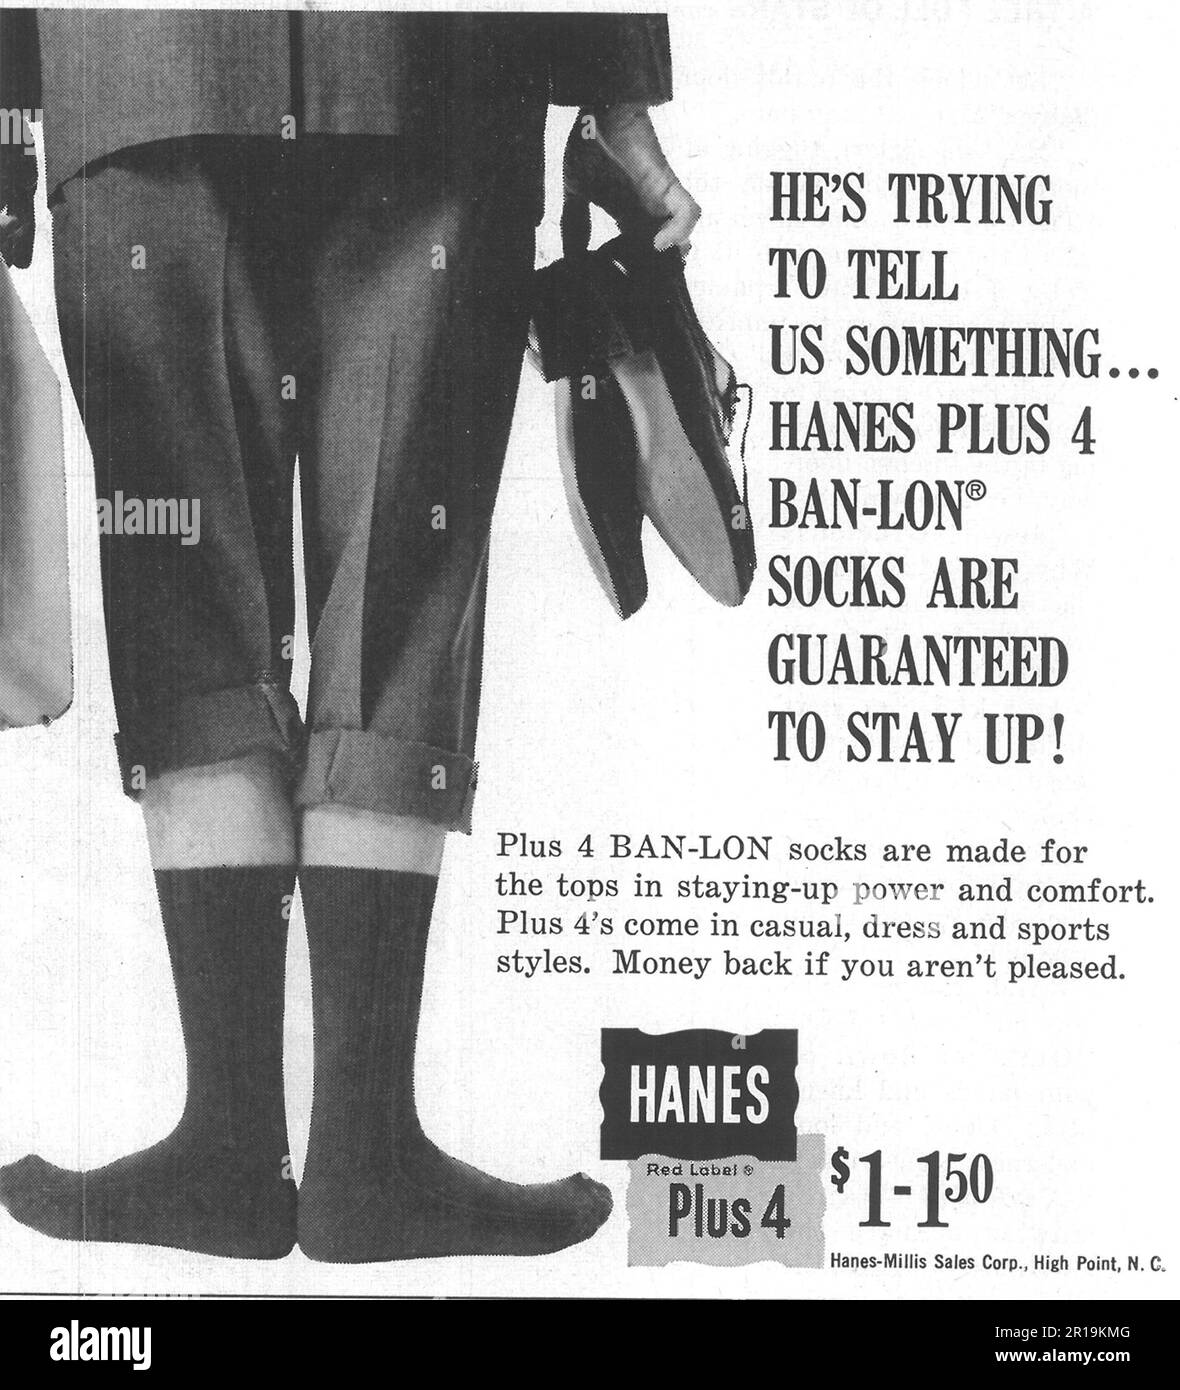 Hanes Red Label Ban-Lon Plus-4 Socks in a Journal magazine, 1965 Stock Photo